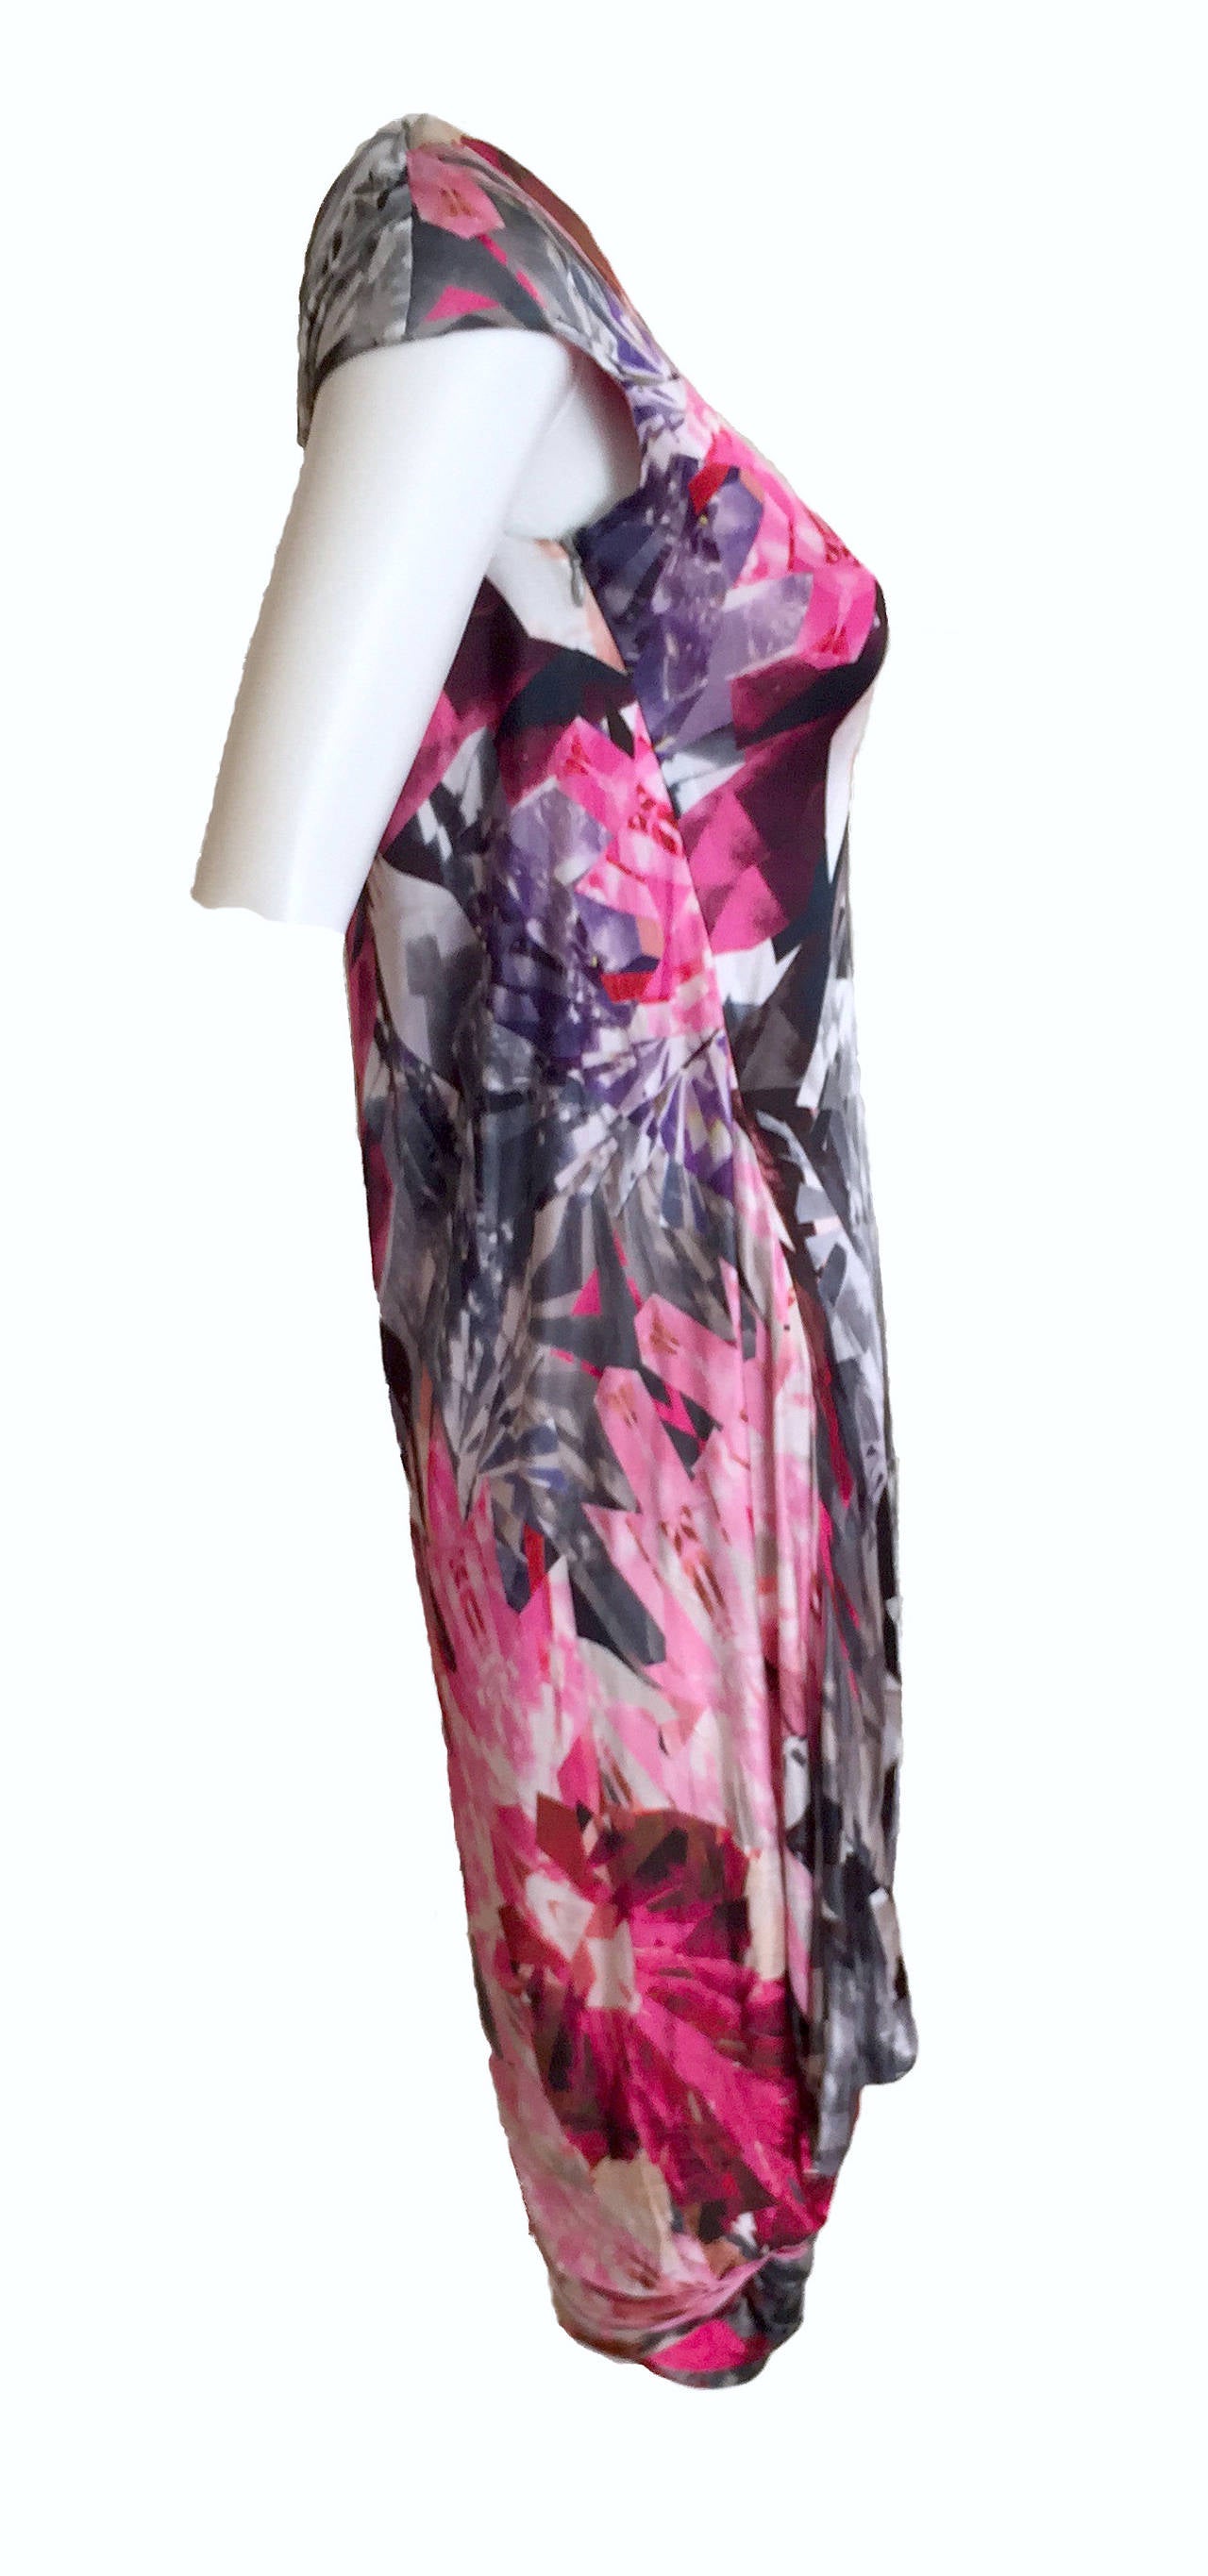 Rare, iconic Alexander McQueen runway pink and black kaleidoscope print dress from the 2009 Spring Summer Collection Natural Dis-Tinction Un-Natural Selection. Dress has short cap sleeves and a round neckline. Zips at shoulder and side. Ruched at